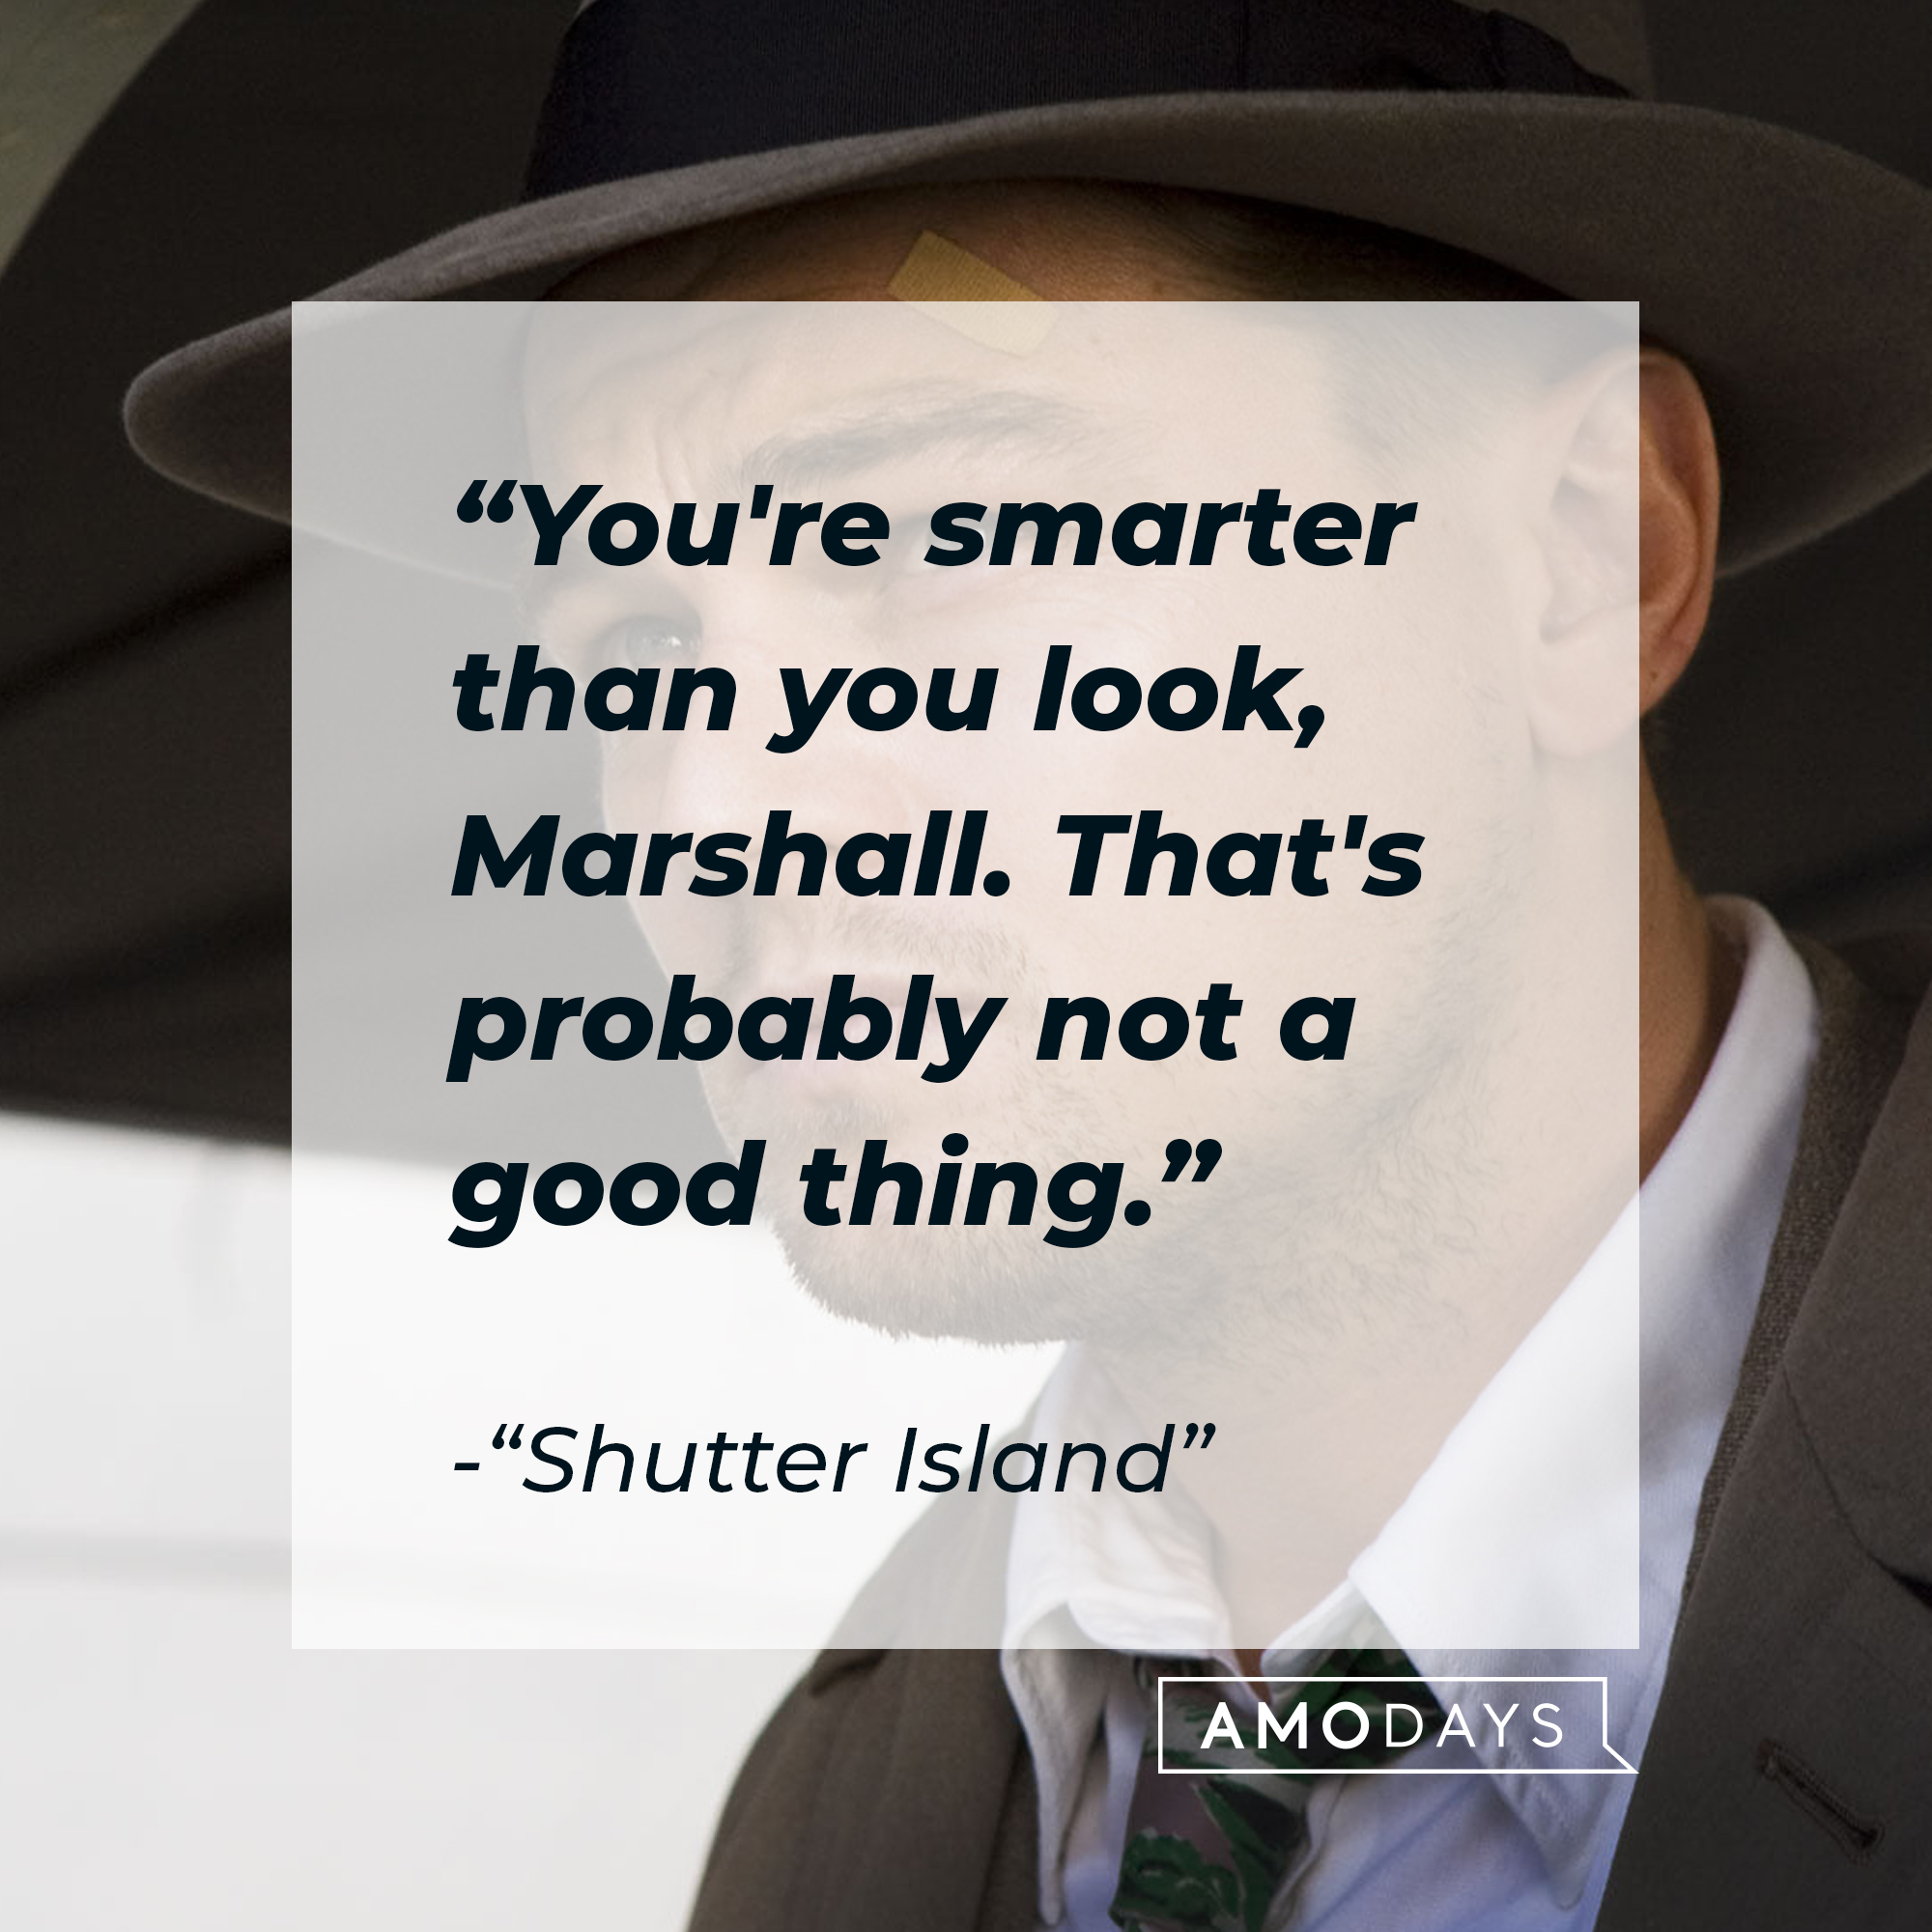 "Shutter Island" quote: "You're smarter than you look, Marshall. That's probably not a good thing." | Source: facebook.com/ShutterIsland